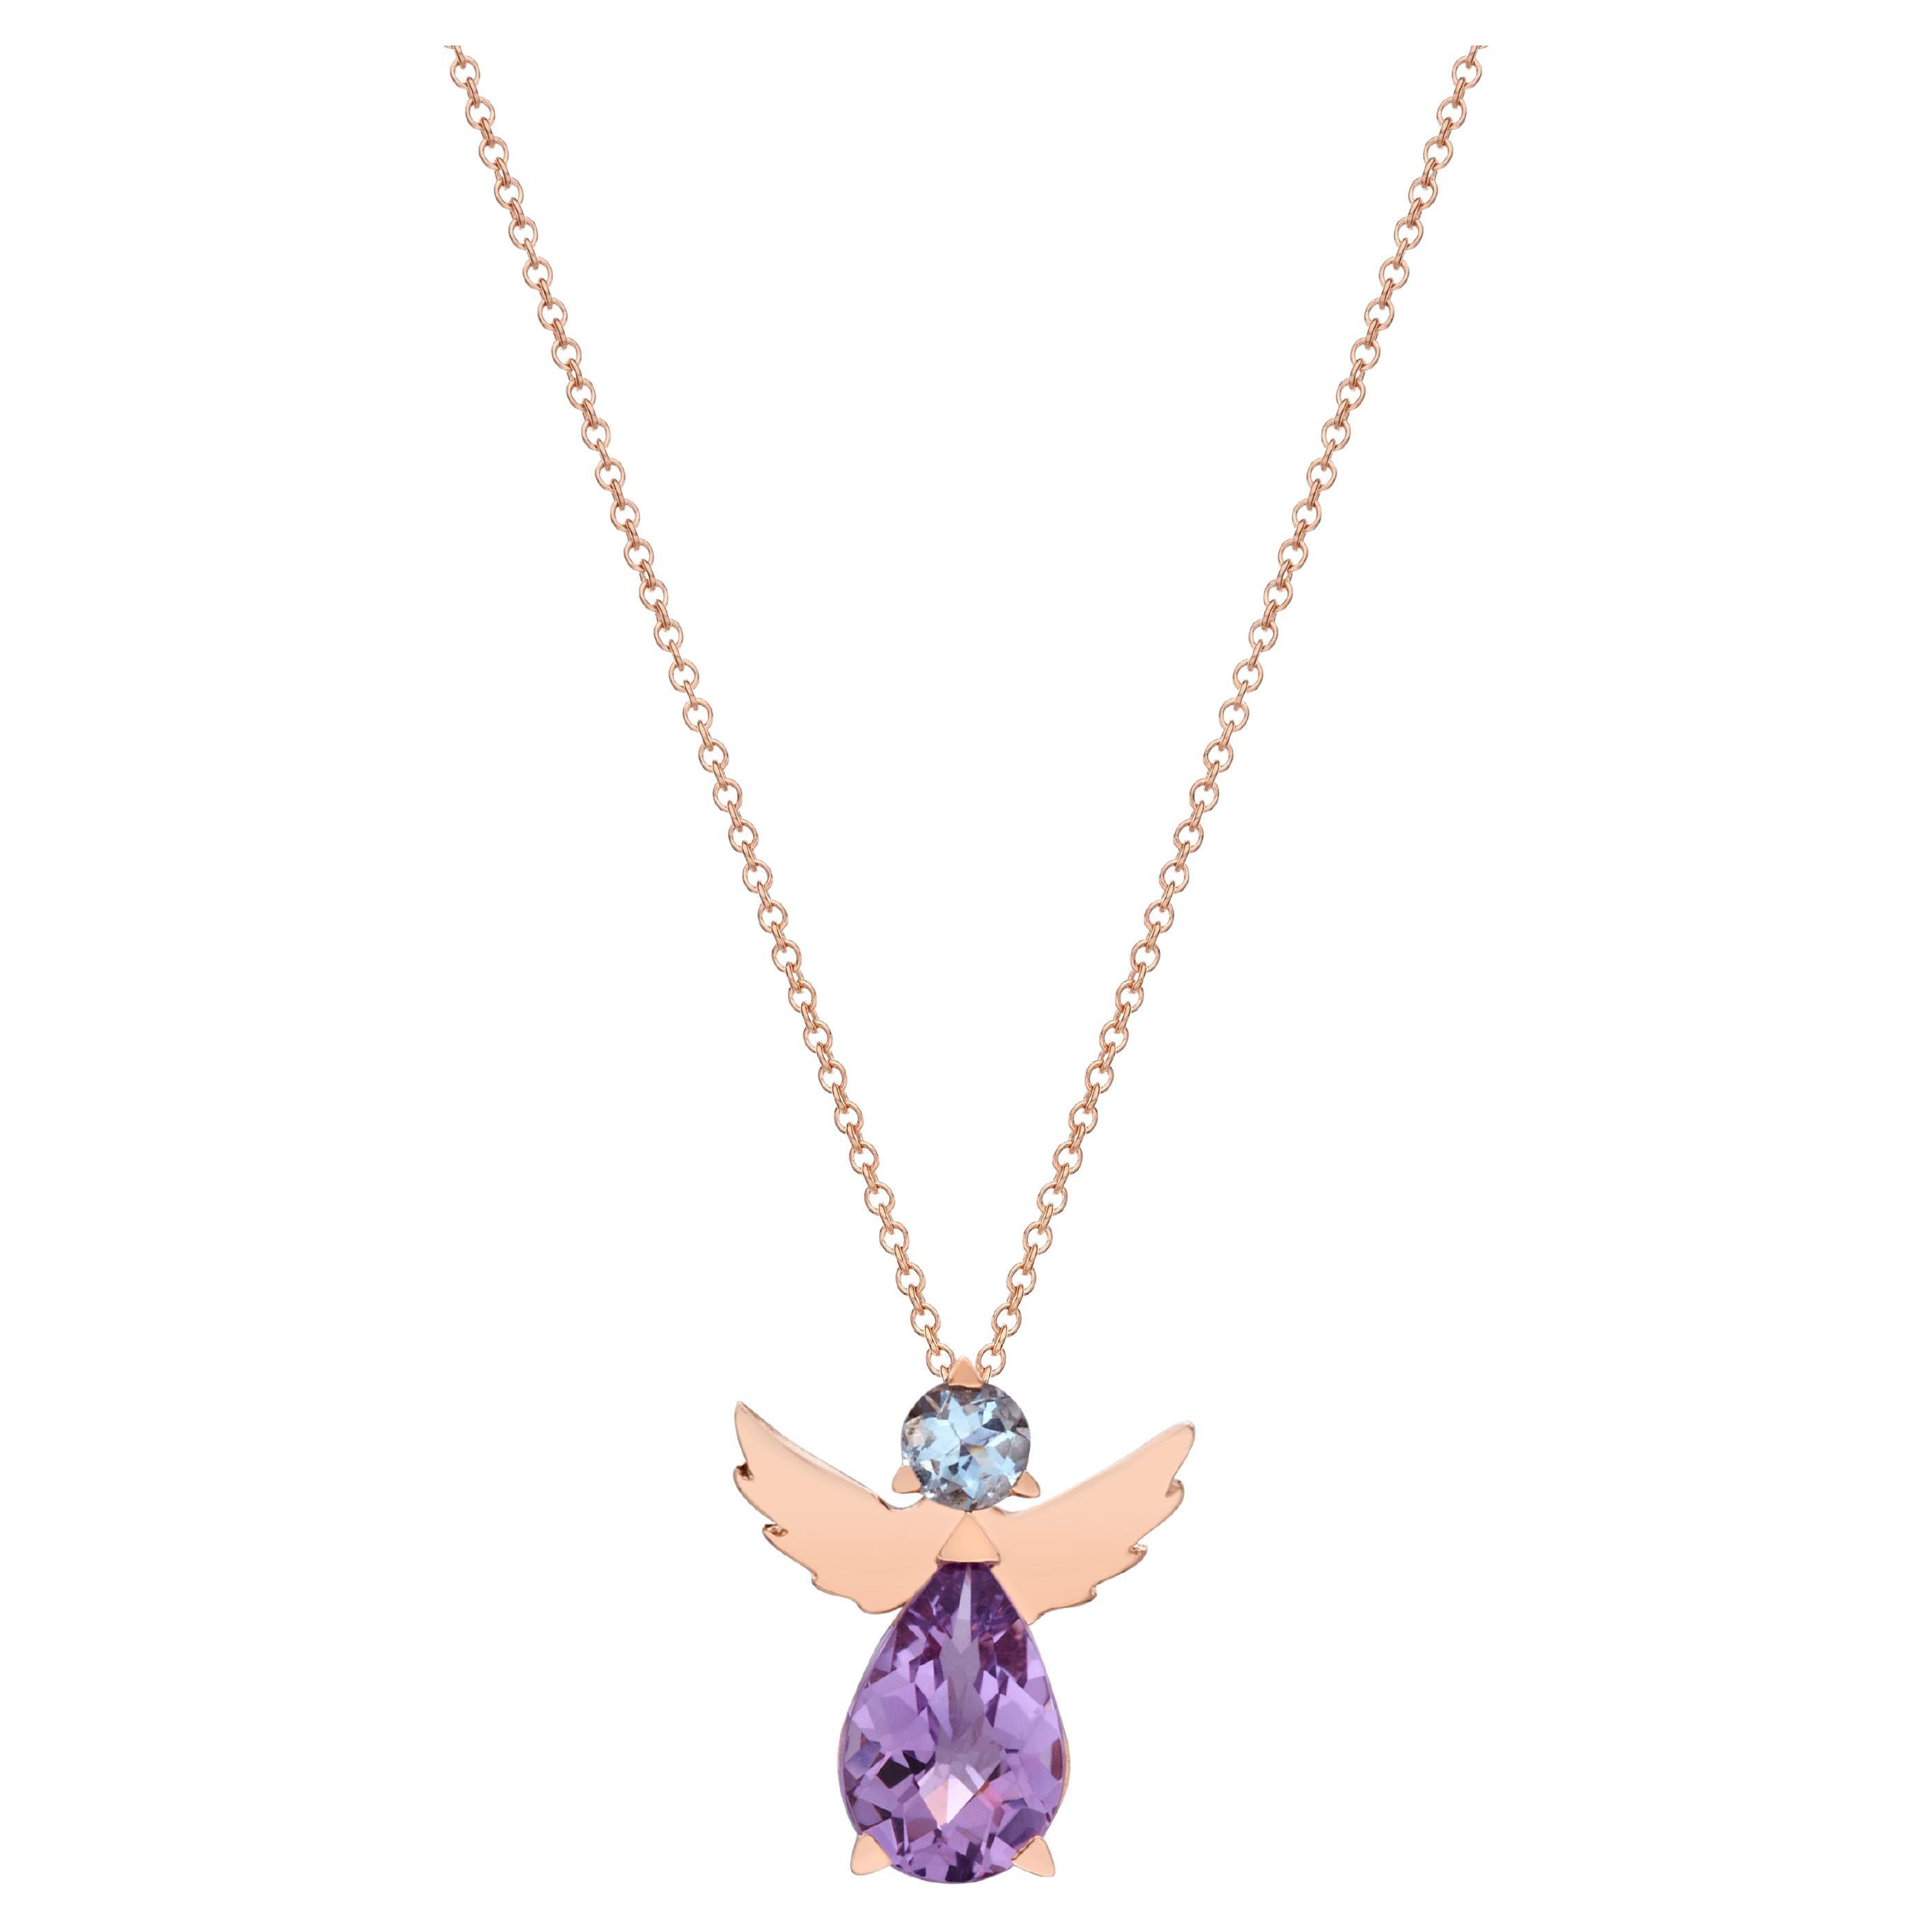 Angel Pendant Necklace 18kt Rose Gold with Blue Aquamarine and Purple Amethyst